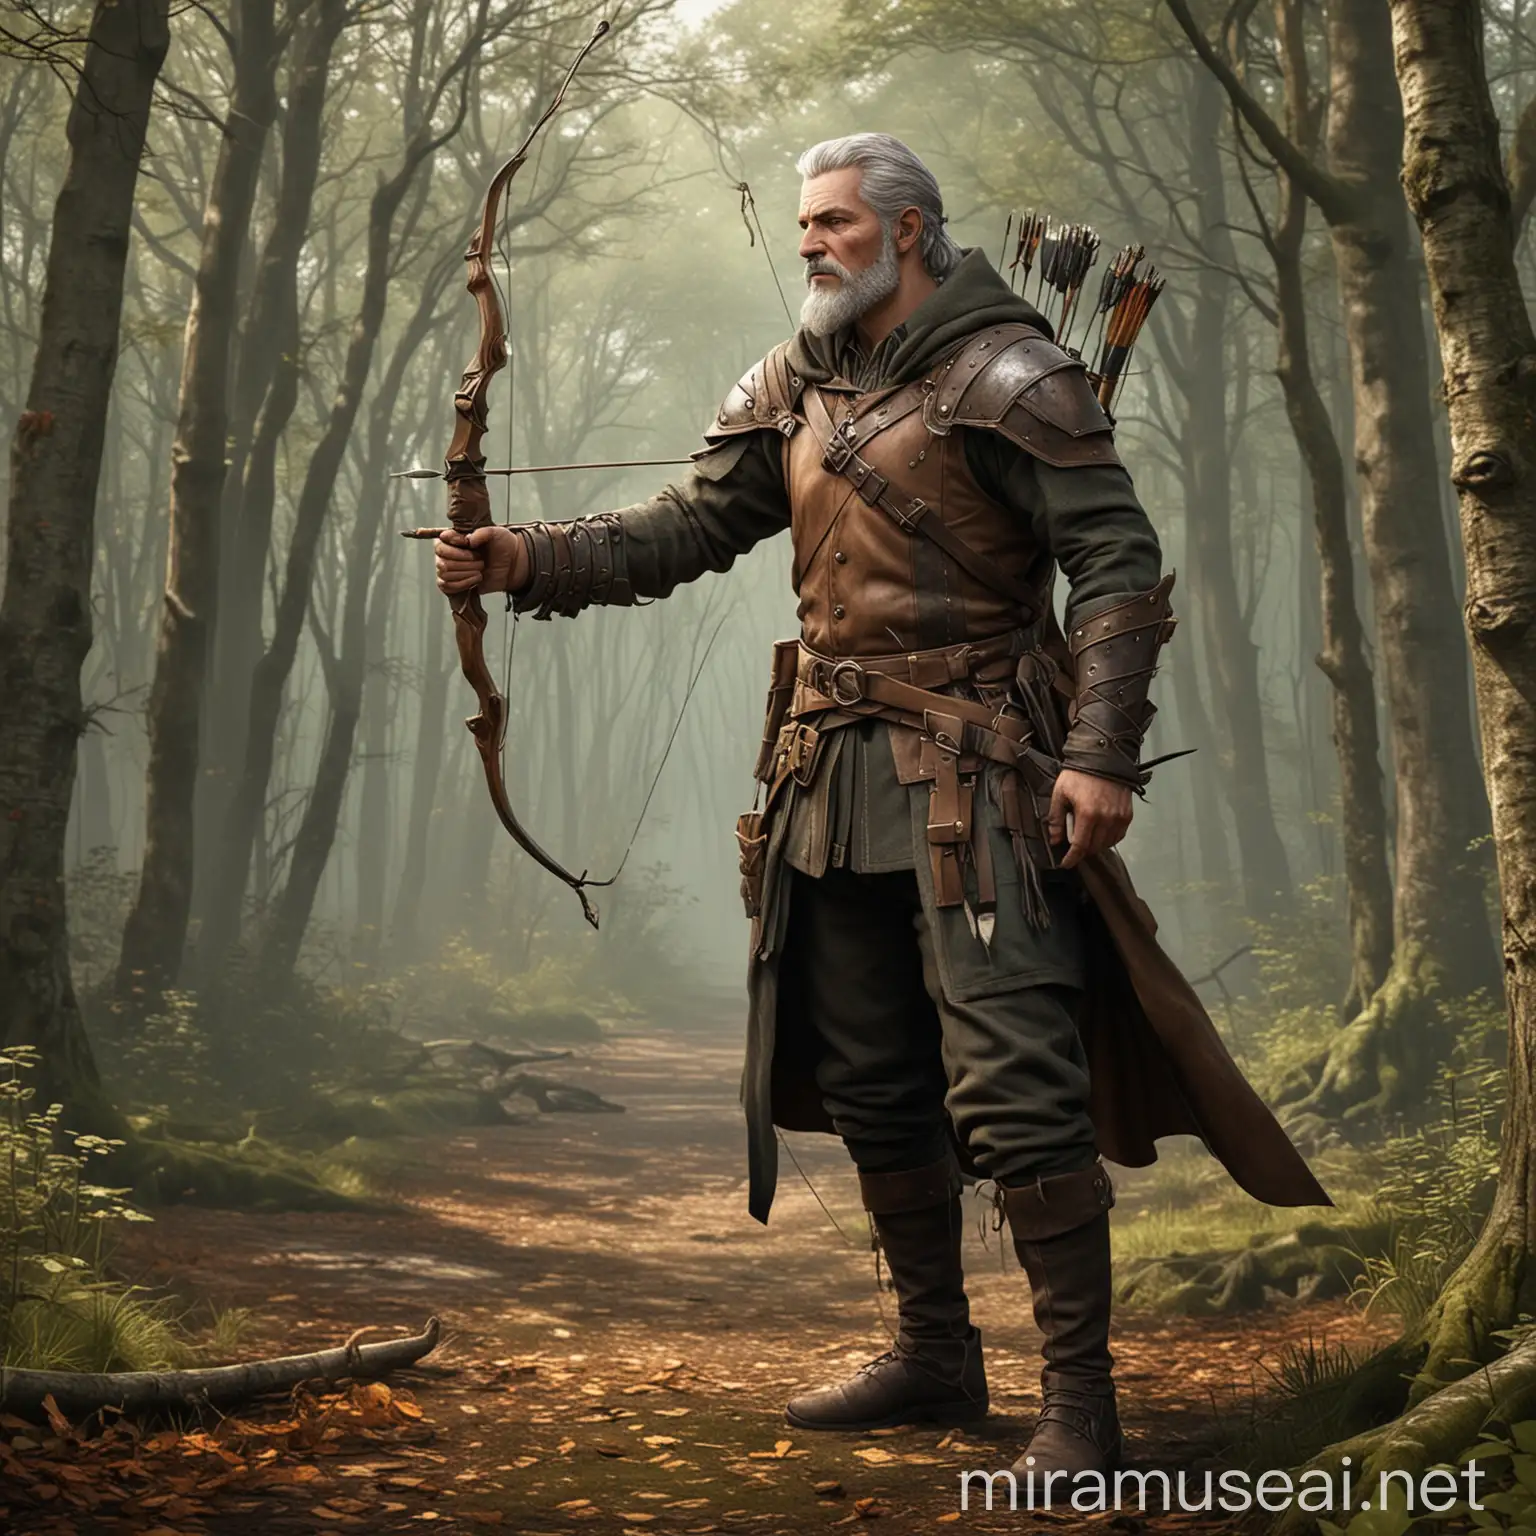 Create a full length male character of a skilled archer, older, living in woodlands, former brigand